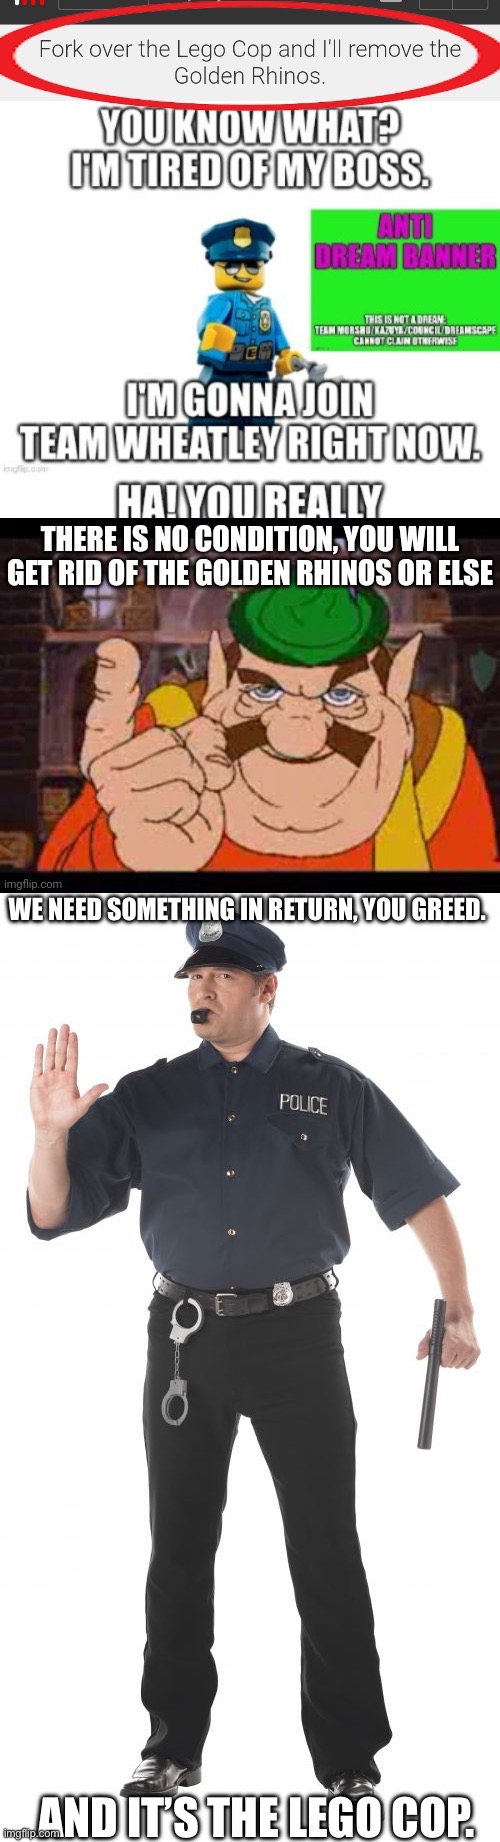 Unless you want the genocide against your team, you don’t have a choice. | WE NEED SOMETHING IN RETURN, YOU GREED. AND IT’S THE LEGO COP. | image tagged in memes,stop cop | made w/ Imgflip meme maker